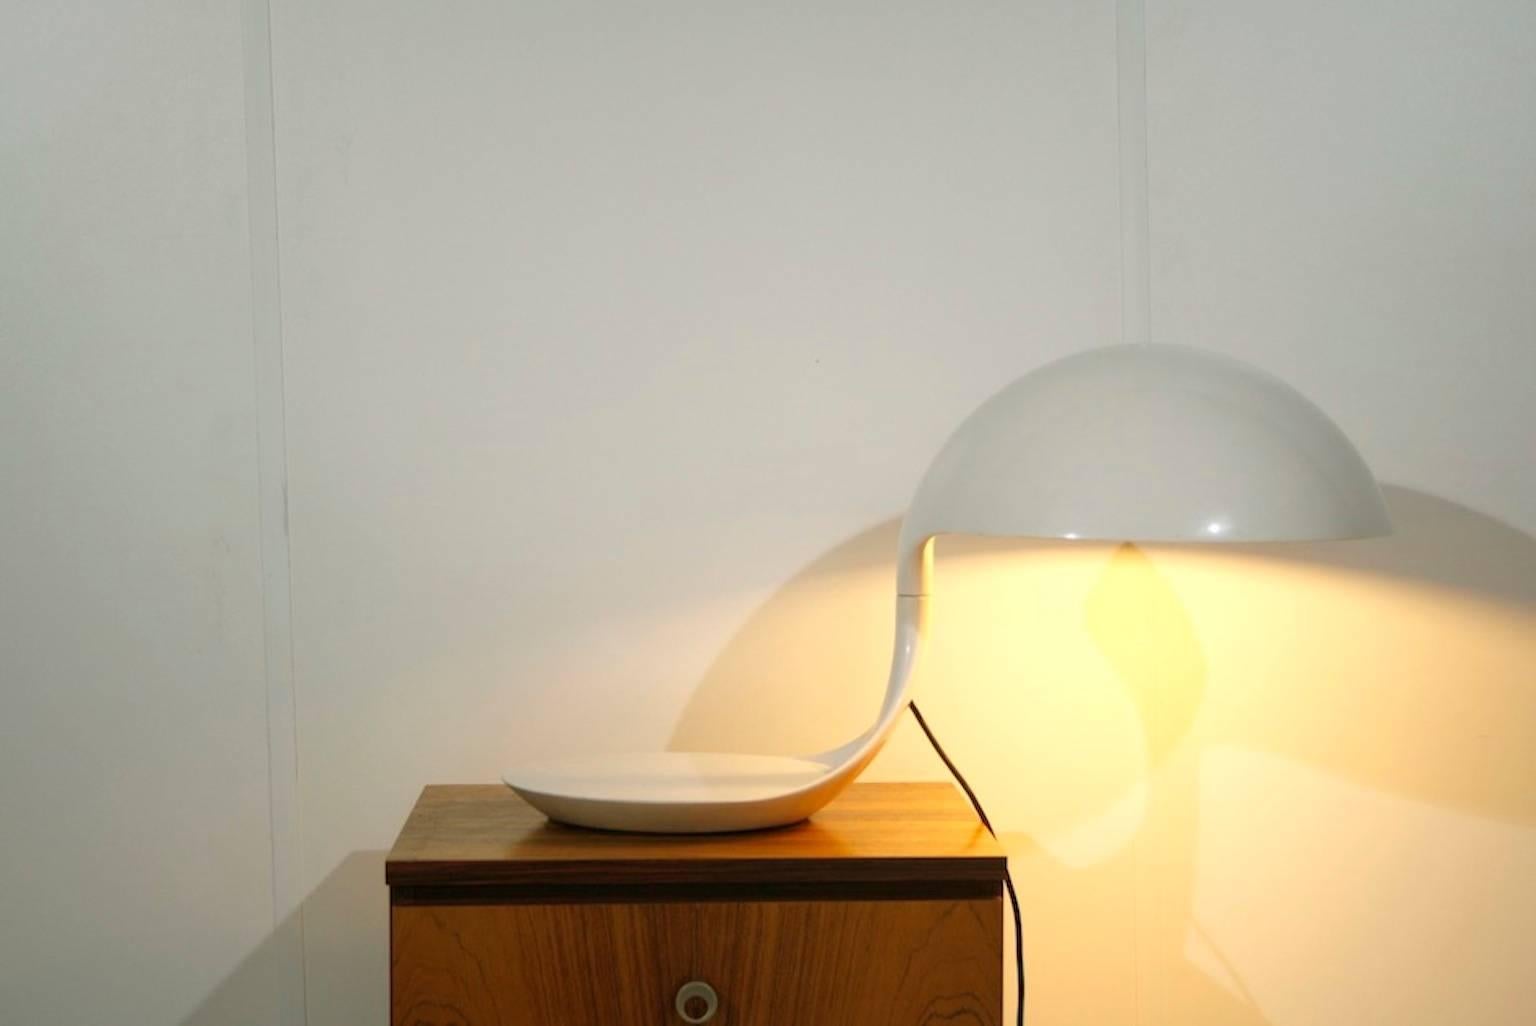 Original edition from 1968. White resin table light. The lower body rotates on the steel base and can rotate 360°. The inside reflector is made of aluminium.
Marked at the bottom.

Measure: Height 40 cm
Diameter 40 cm.